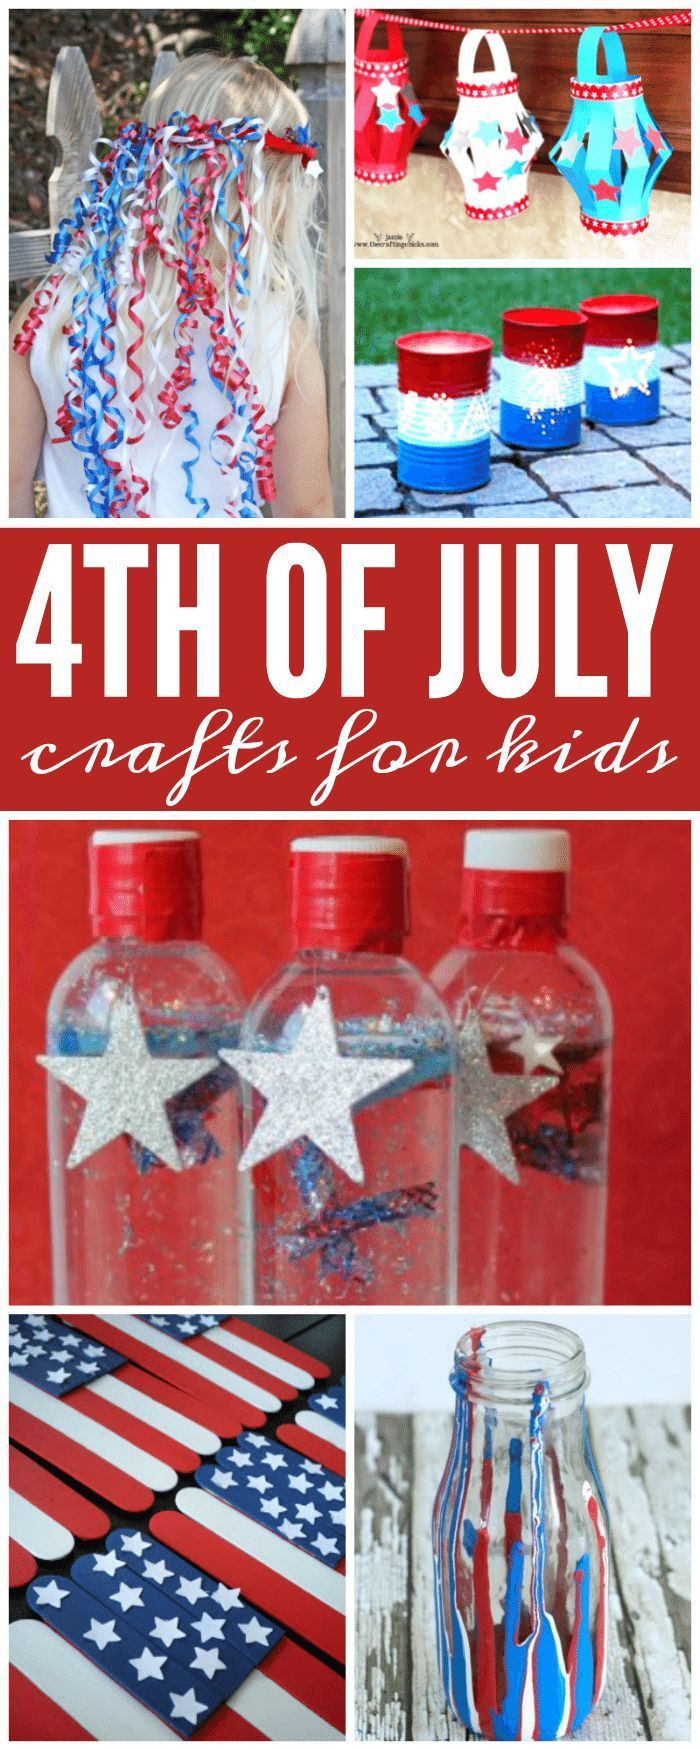 4Th Of July Kids Crafts
 Here are some super fun 4th of July Crafts for Kids for